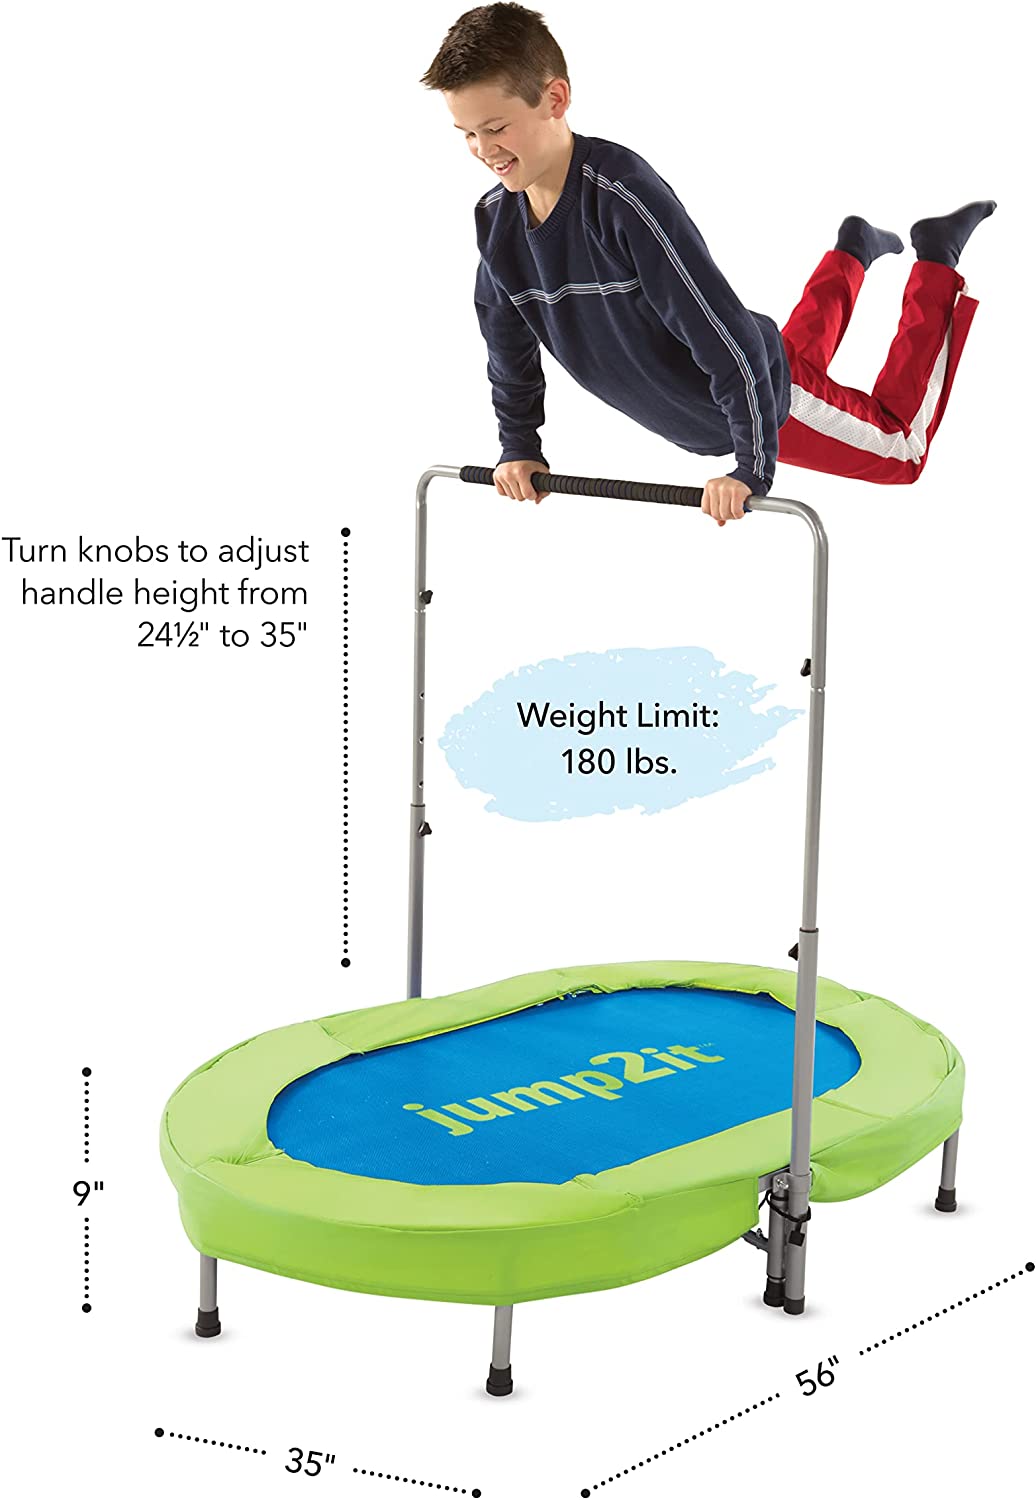 A child with light skin tone and short brown hair is holding onto the handlebars of the Jump2It  Trampoline. Their body is almost horizontal and they are looking down and smiling. The text shows the dimensions of the trampoline and the weight limit.